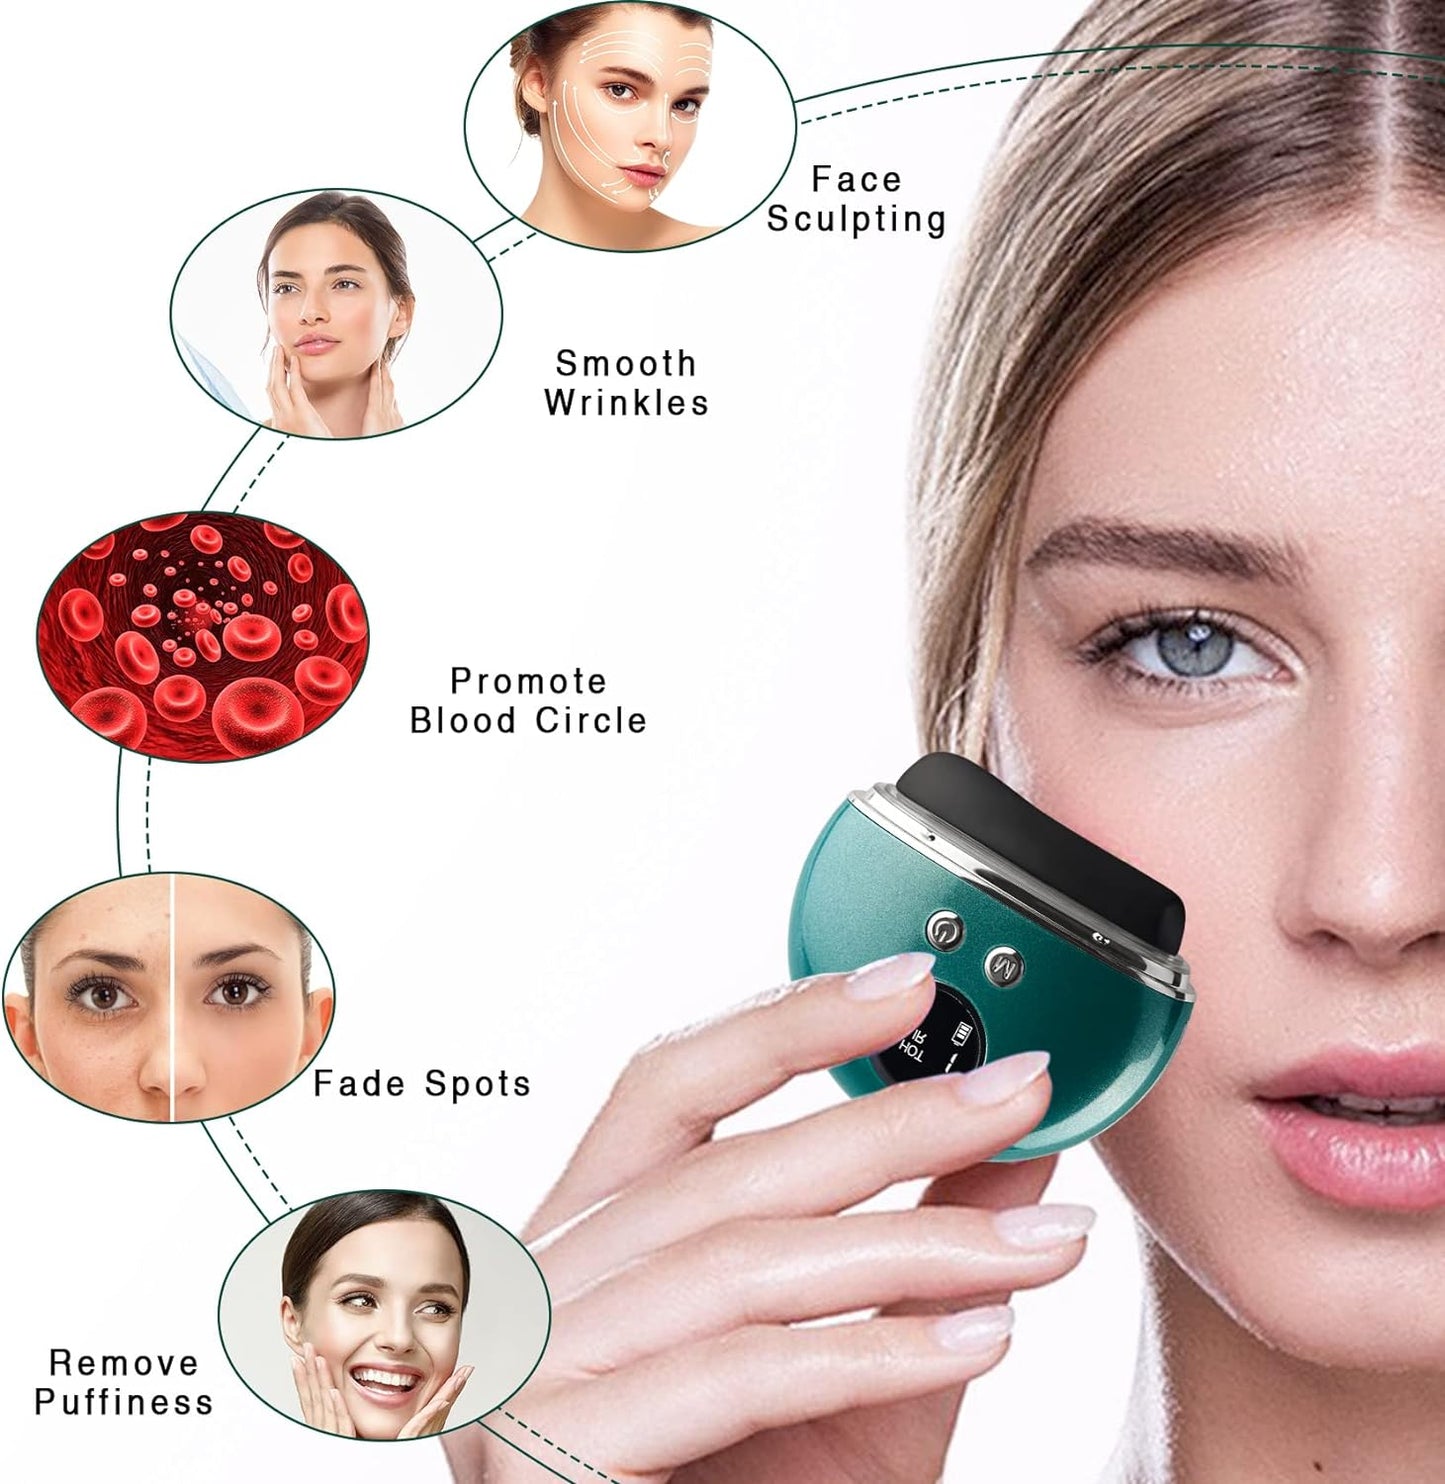 Gua Sha Facial Tools, Multifunction Face Lift Device Gua sha Massage Tool for Face with Heating & Vibration, Face Massage for Anti-Aging, Puffiness (Green-Stone)